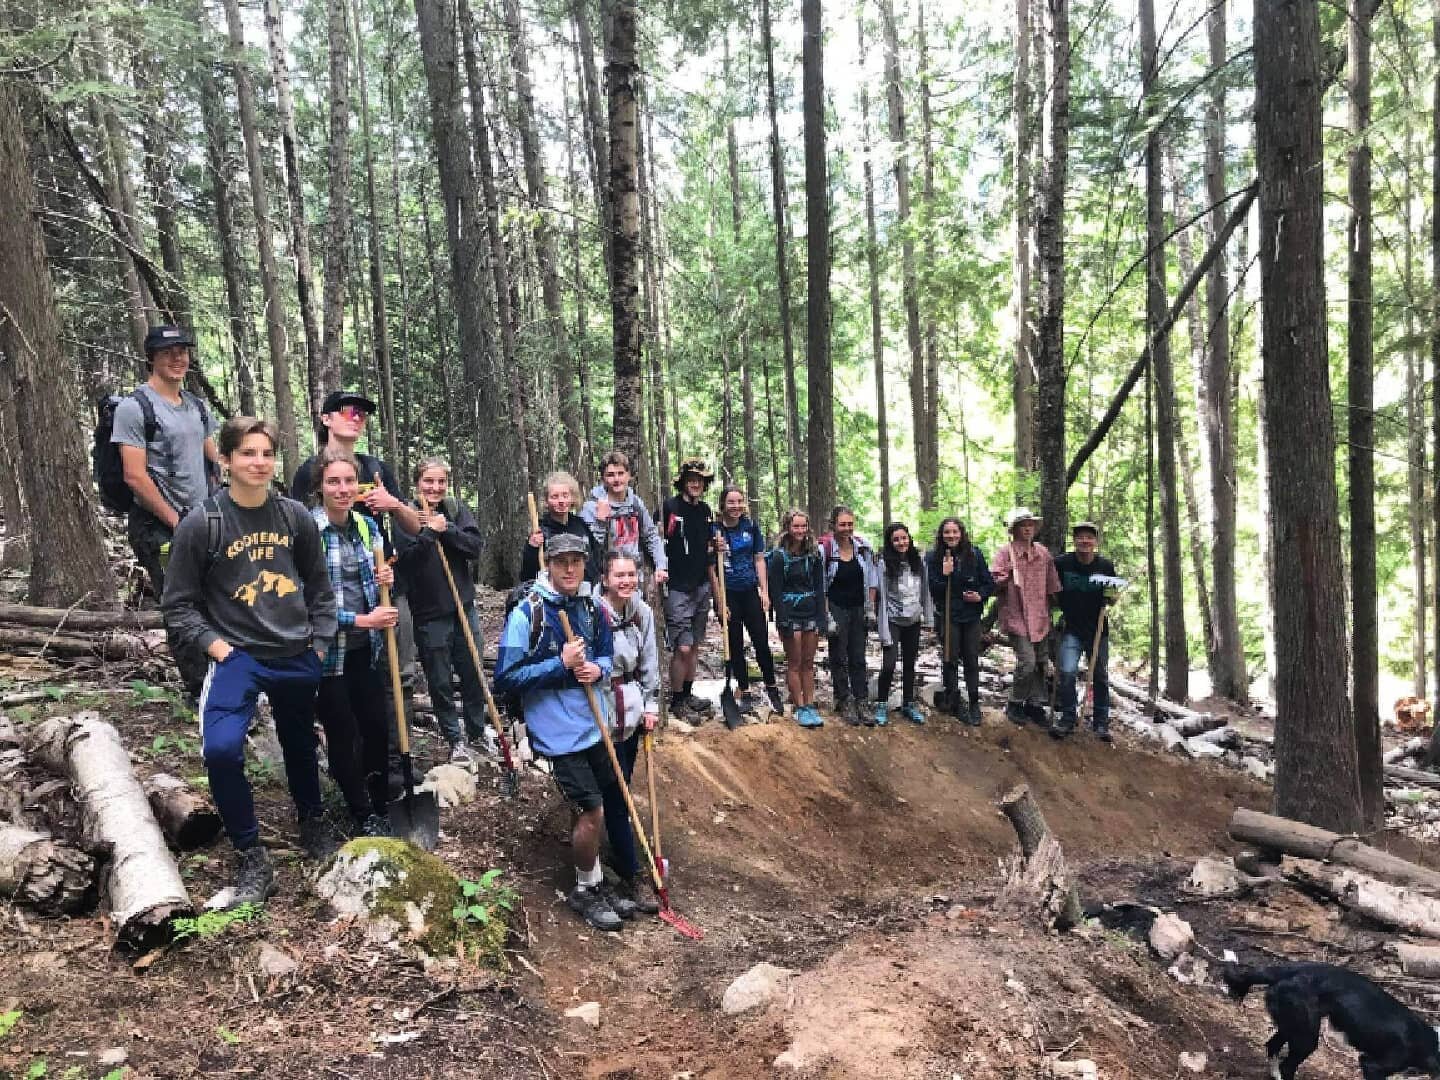 We want to say a big thanks to Graeme Marshall and his ATLAS students for coming out a couple of days this week and giving Racoon/Badger some trail love!&nbsp;
Be sure to purchase your membership to continue to support the efforts of the NCC Trail Cr